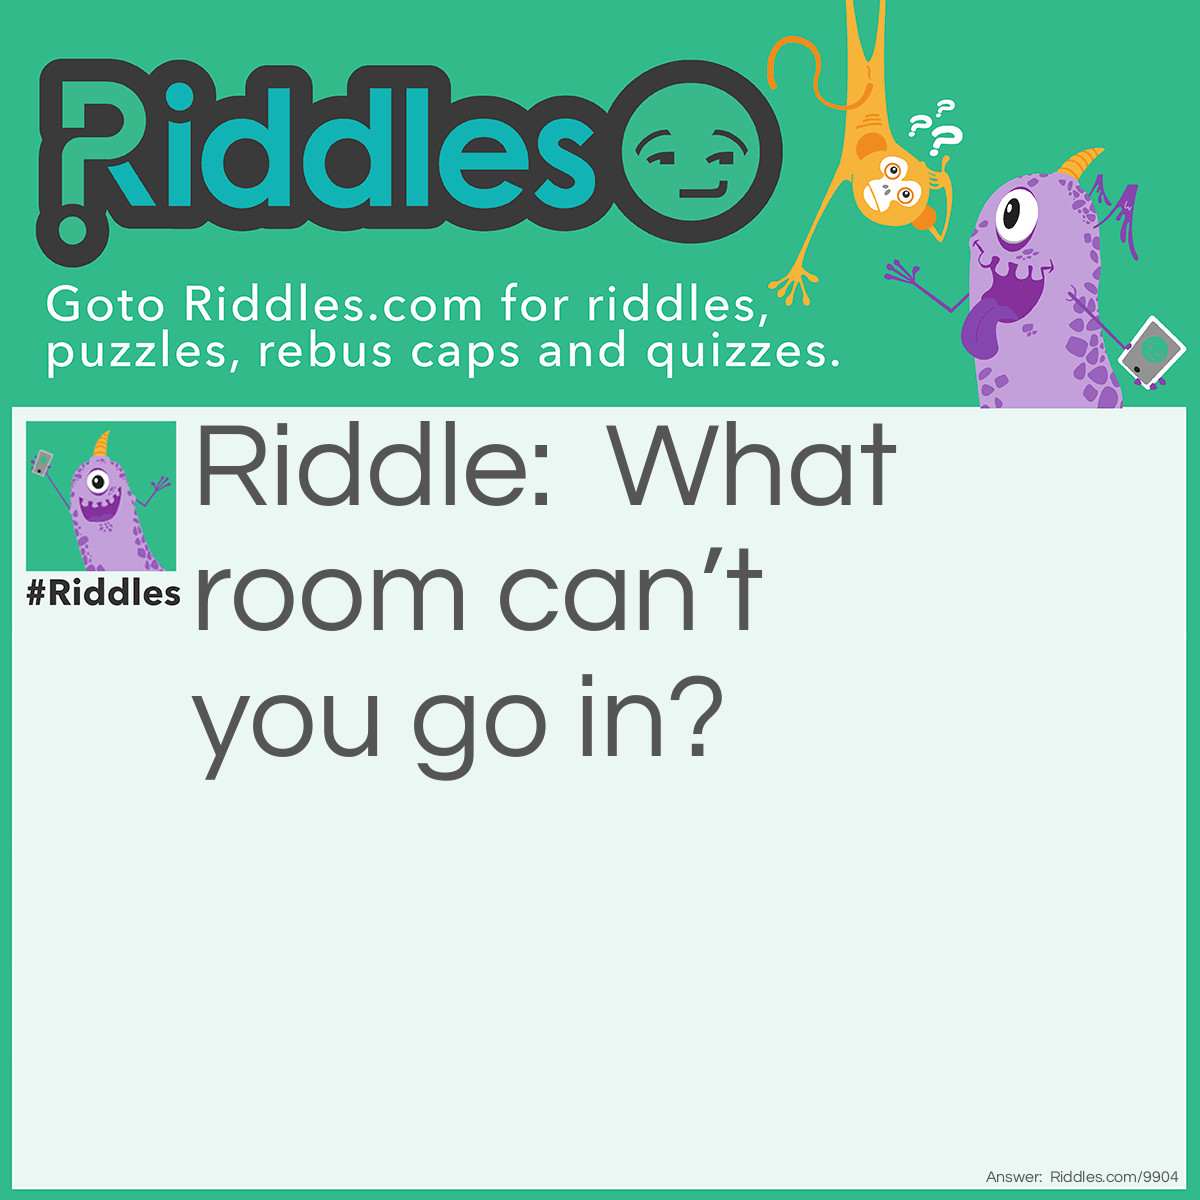 Riddle: What room can't you go in? Answer: A mushroom?